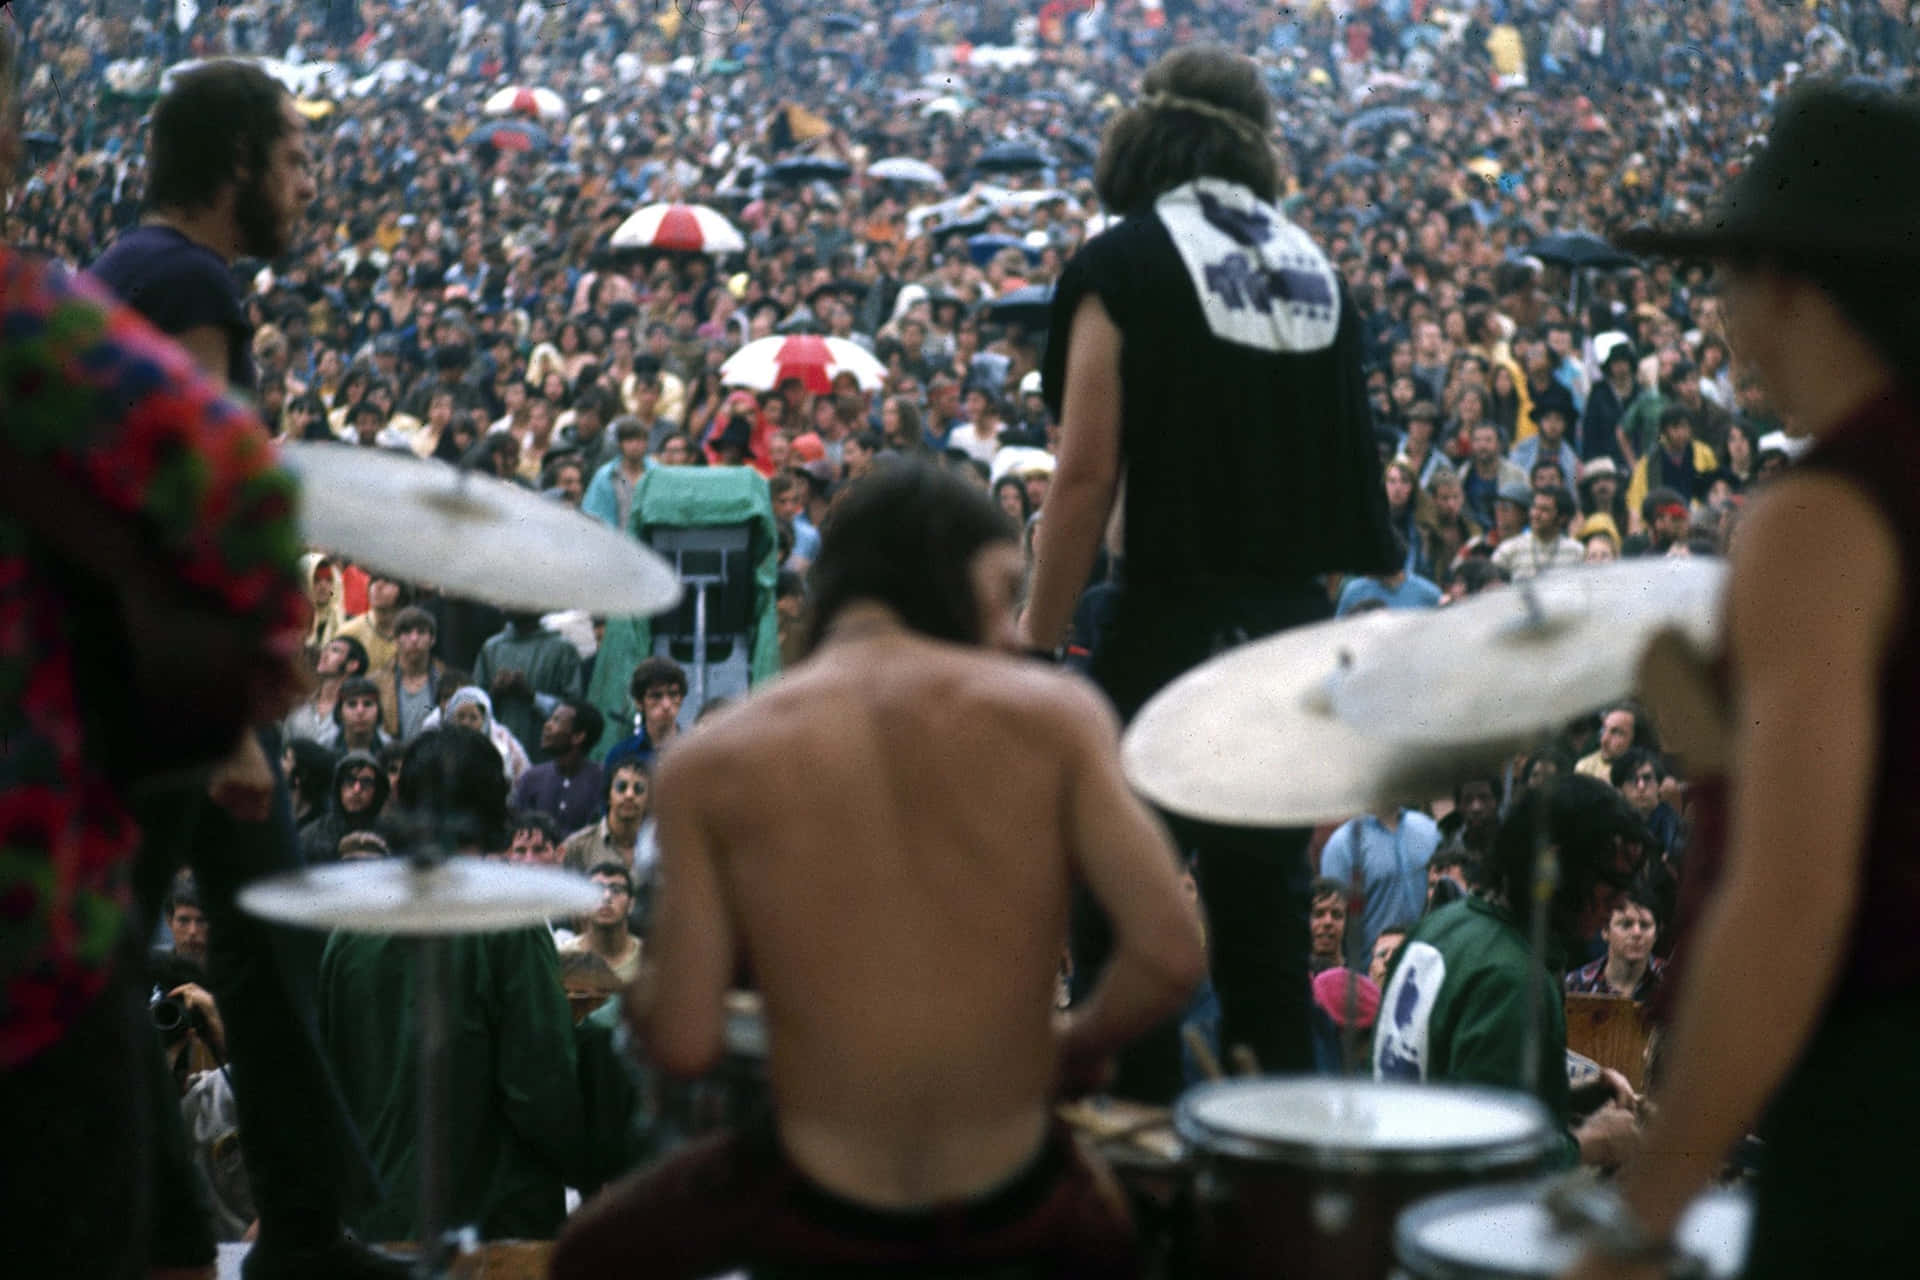 Thousands gather in the iconic Woodstock Music and Arts Fair, 1969